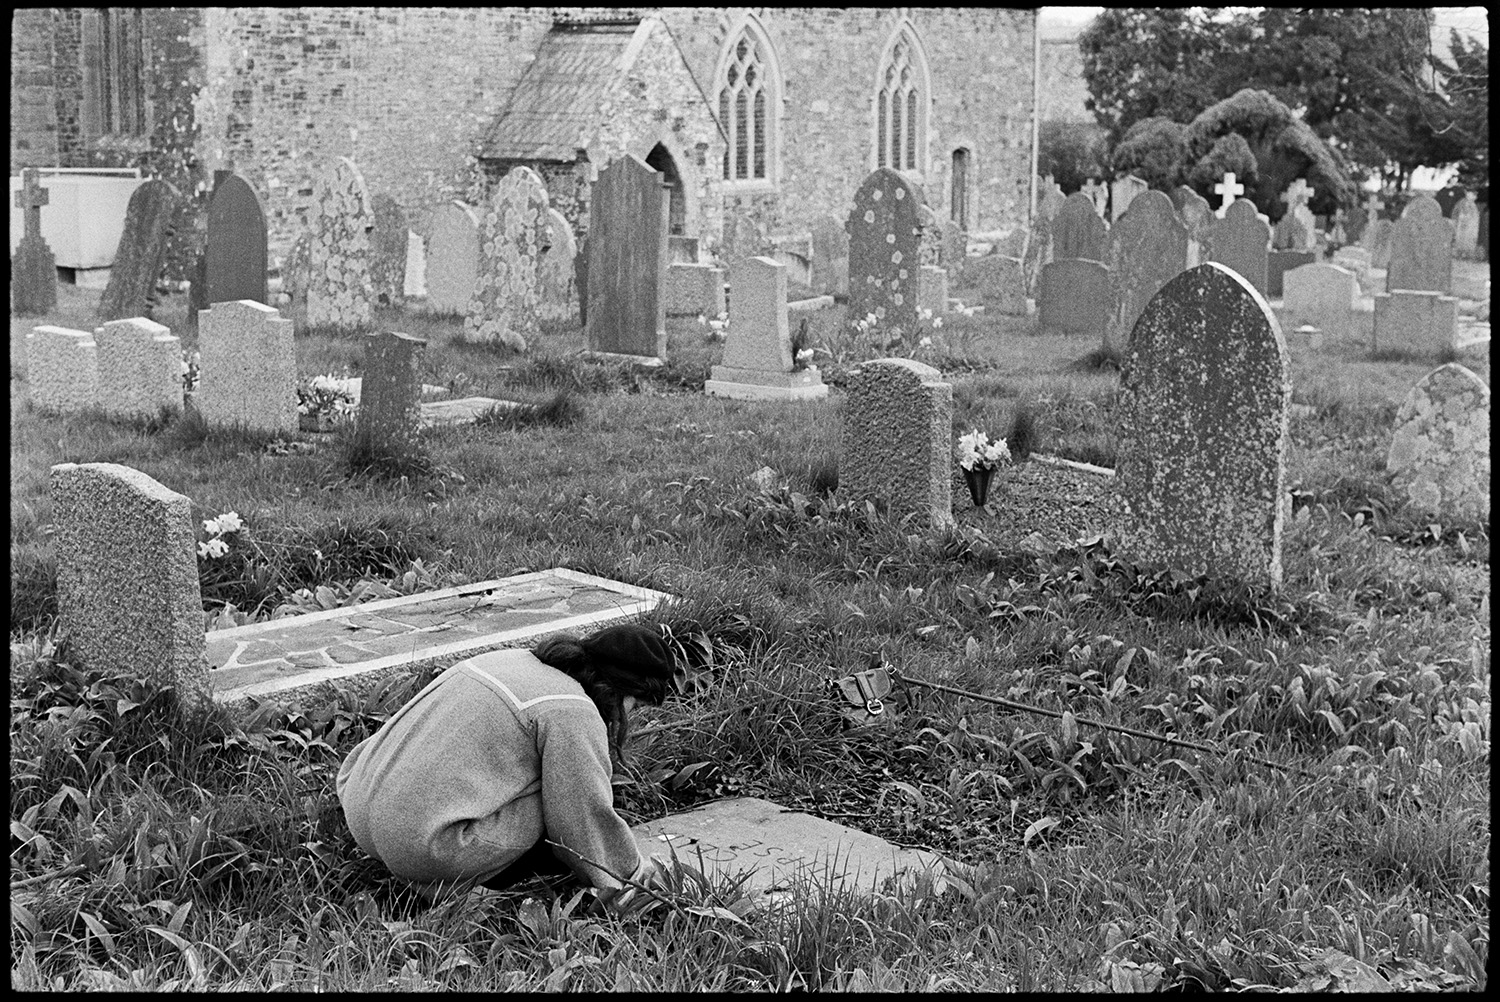 People tending graves. 
[Robin Ravilious putting flowers on a grave in Dolton Churchyard. The church can be seen in the background behind other gravestones.]